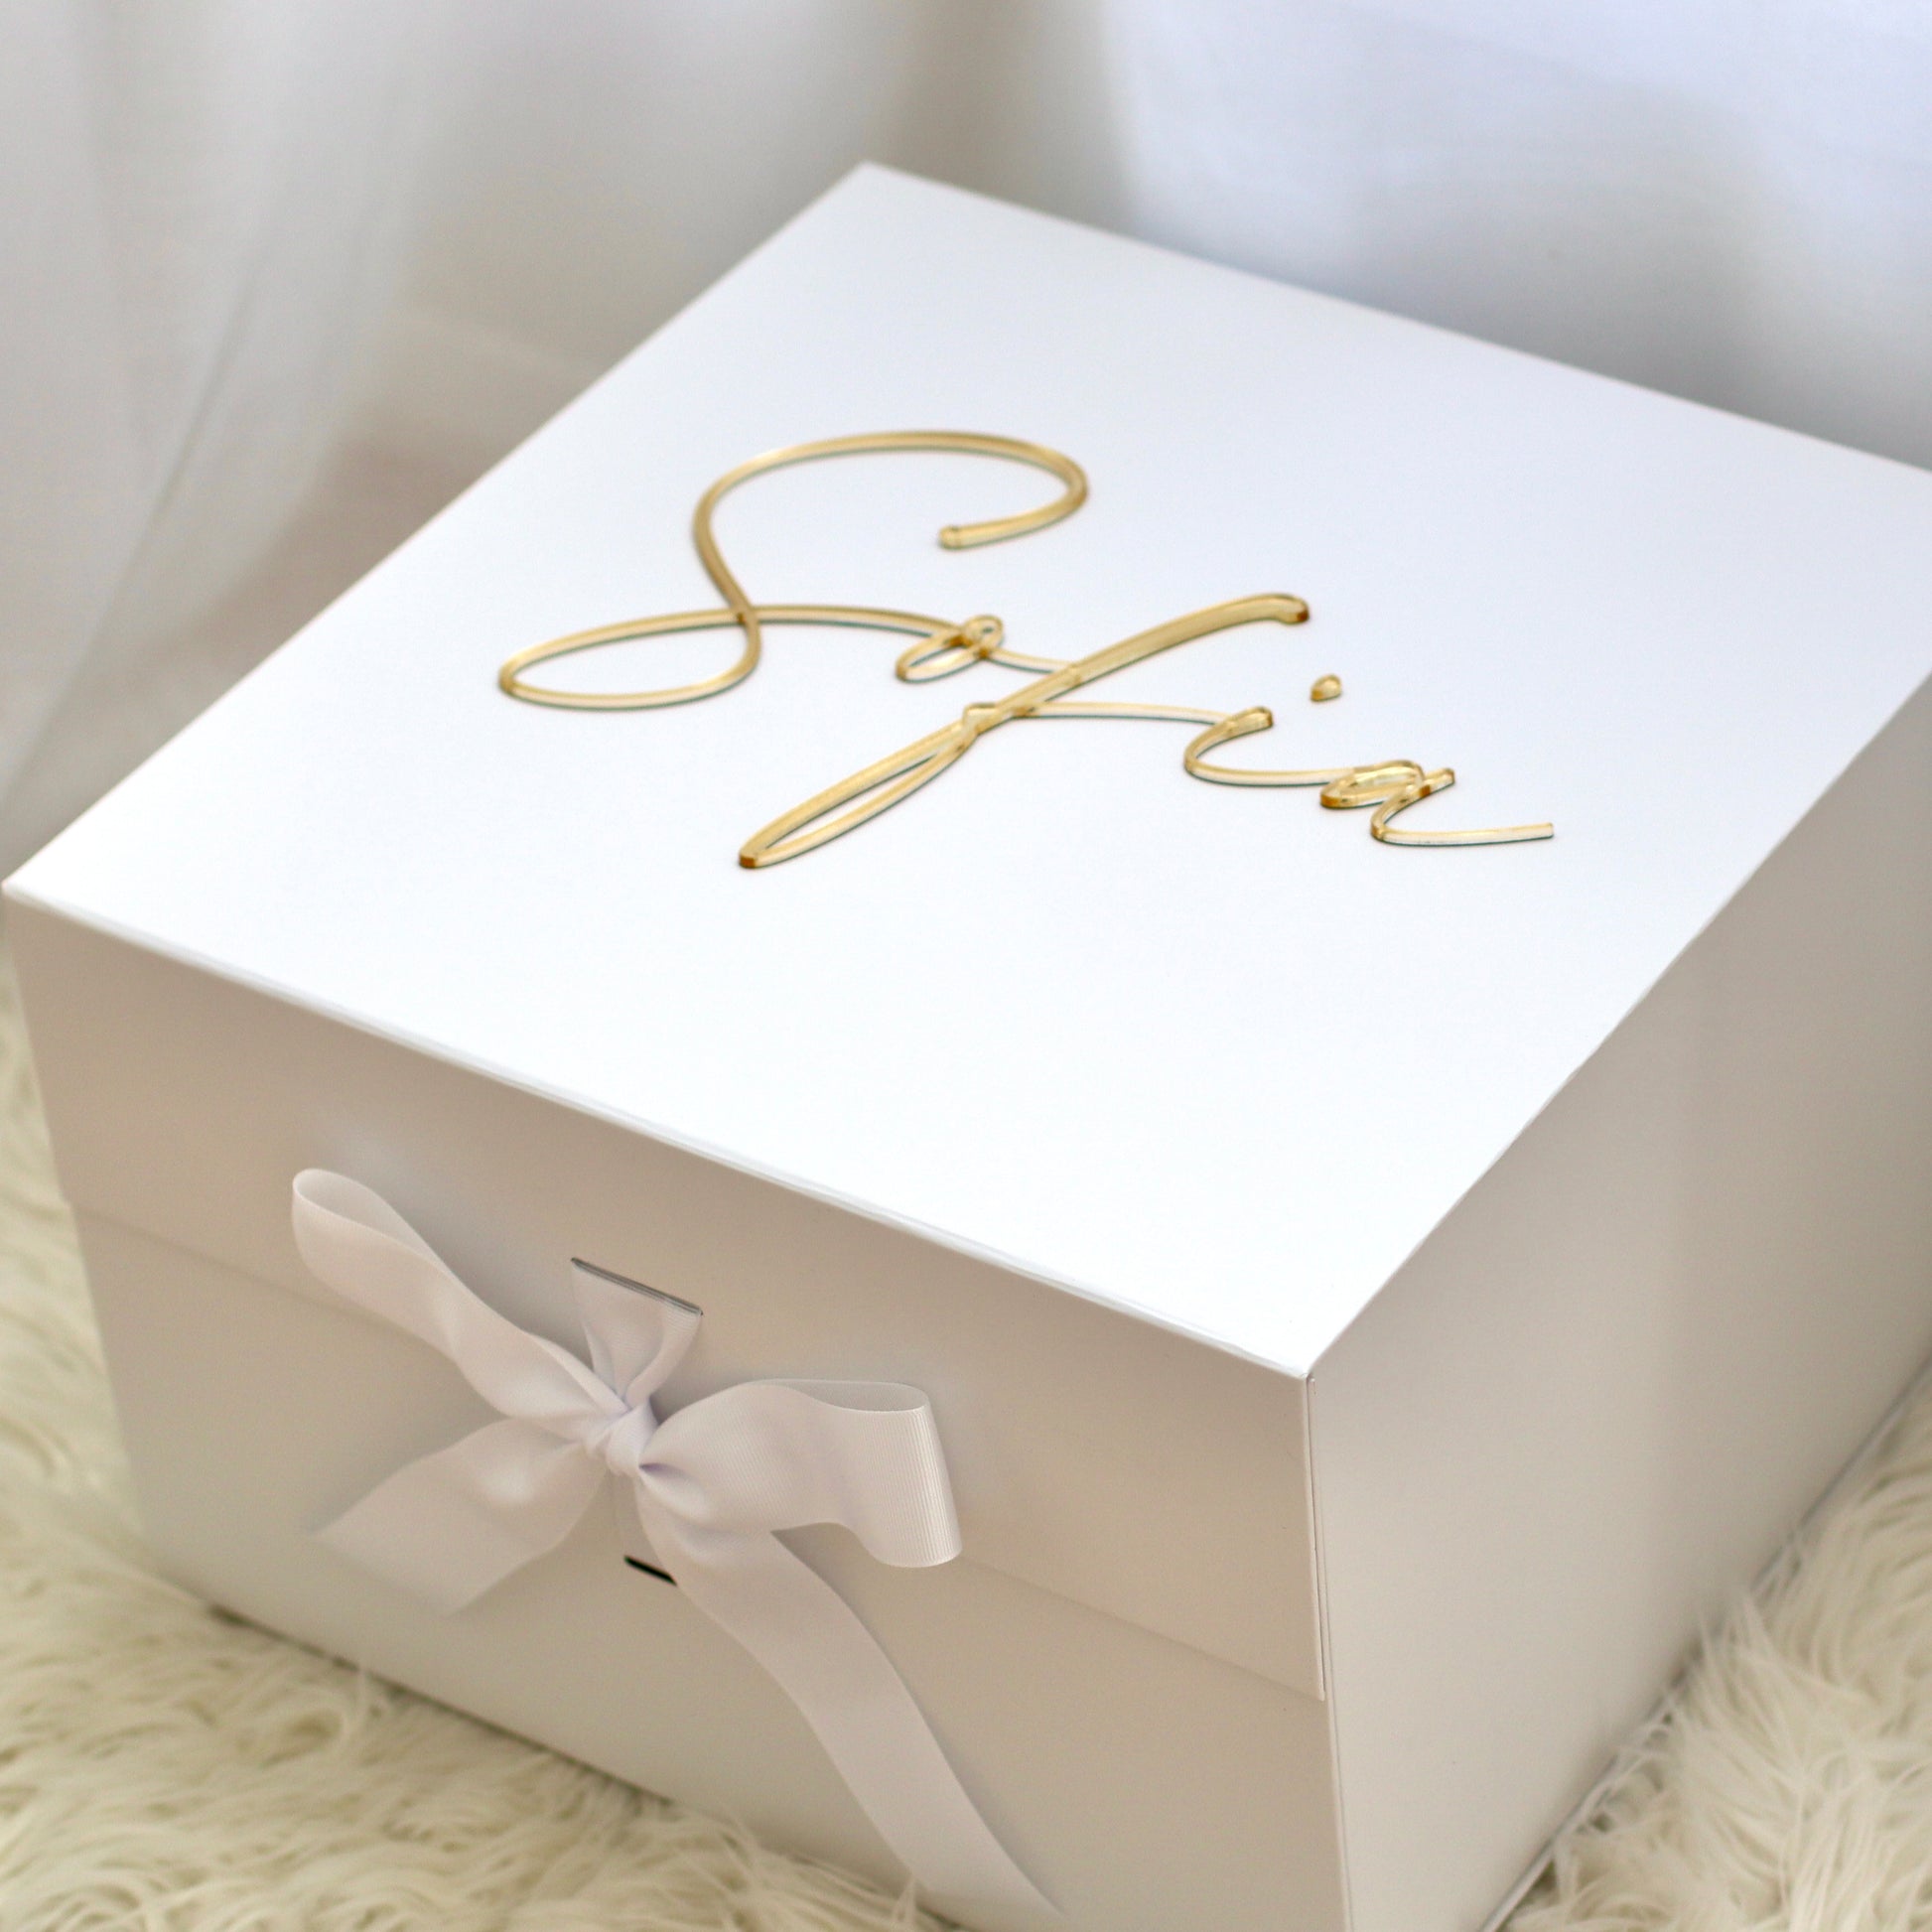 Luxe Catholic Package with Acrylic Name includes 1 x Your choice of White Extra Large Box or Clear Extra Large Acrylic Box  1 x Acrylic Name on the box 1 x Embroidered Stole 1 x Embroidered Bath Towel 1 x Embroidered Hand Towel 1 x Baptism Candle with acrylic letter 1 x Brush Set 1 x Rattle  1 x Trinket Box